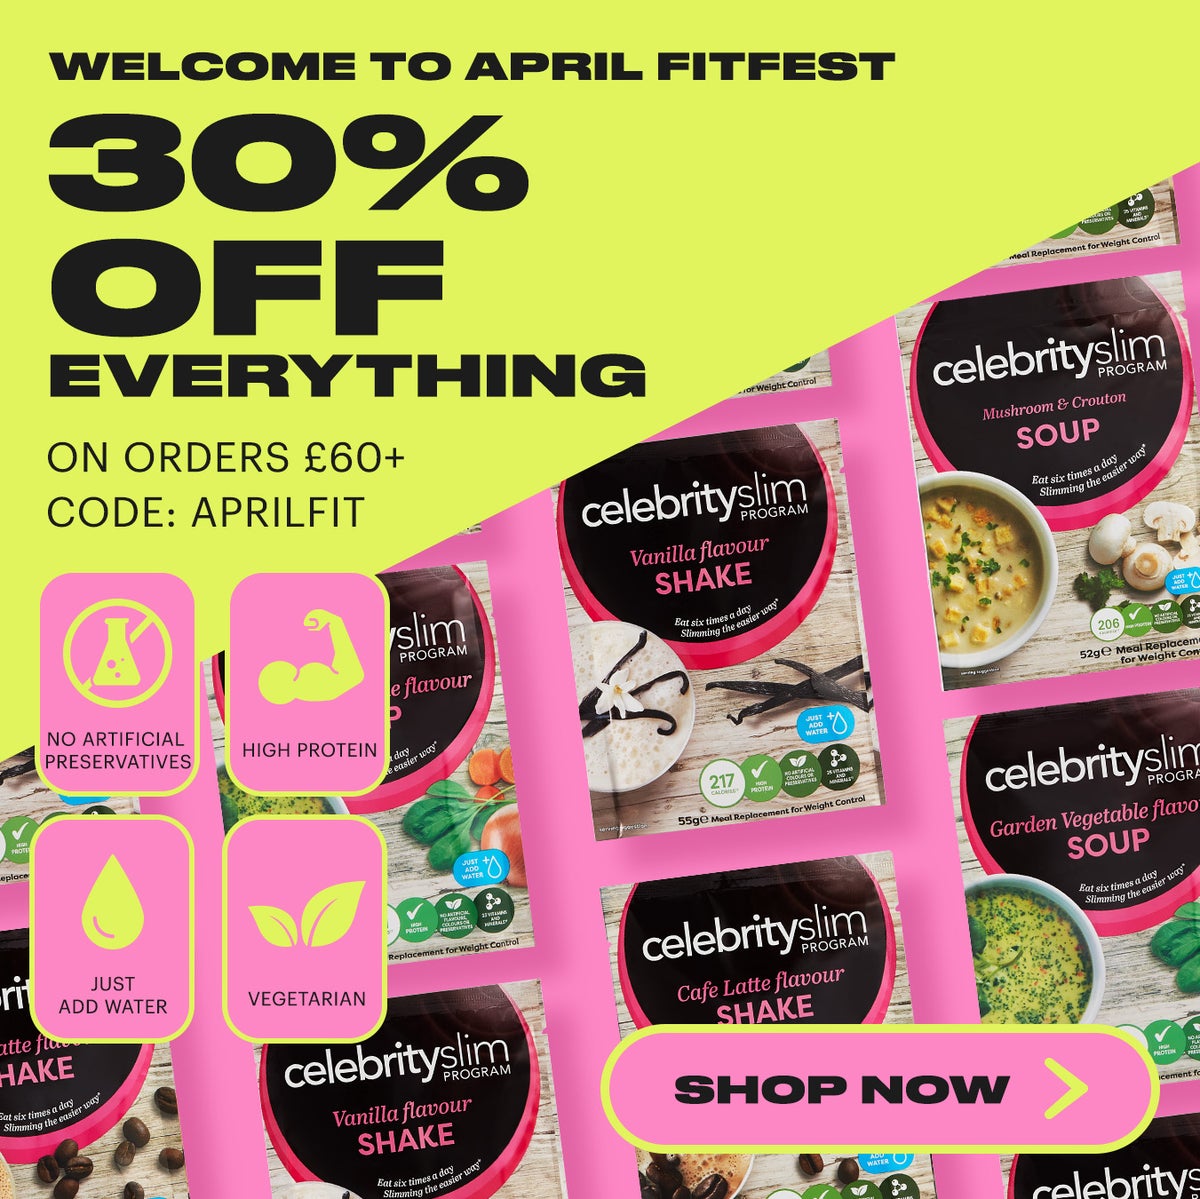 WELCOME TO APRIL FITFEST | 30% OFF ON ORDERS £60+ | USE CODE: APRILFIT